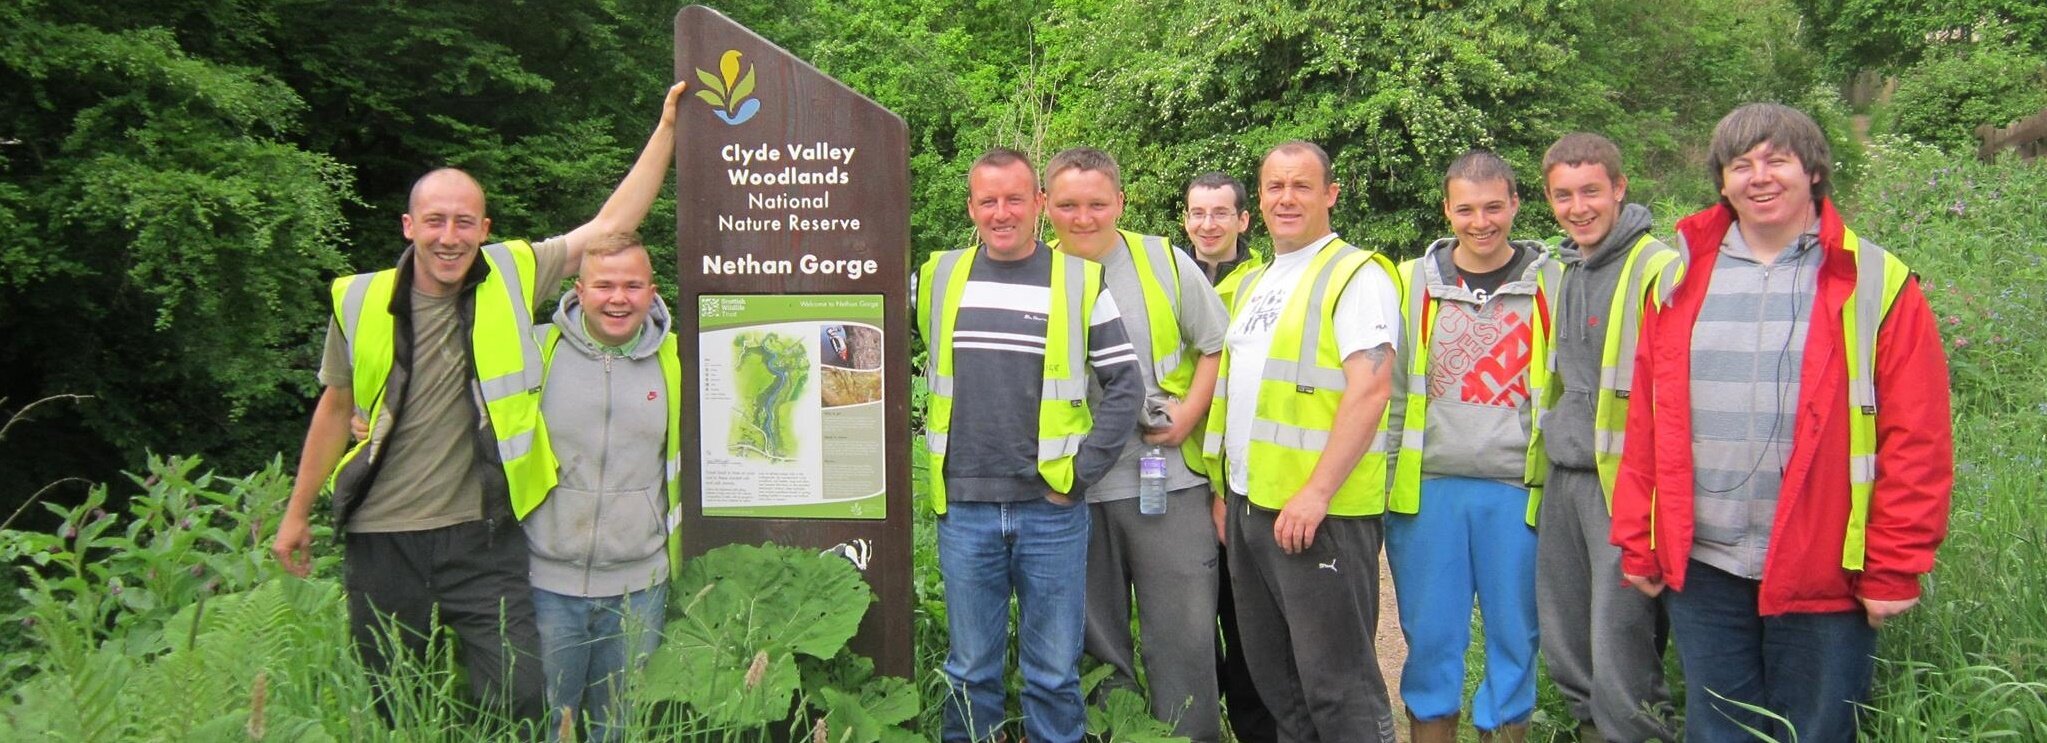 Get on the path to improving Clyde Walkway Community Links